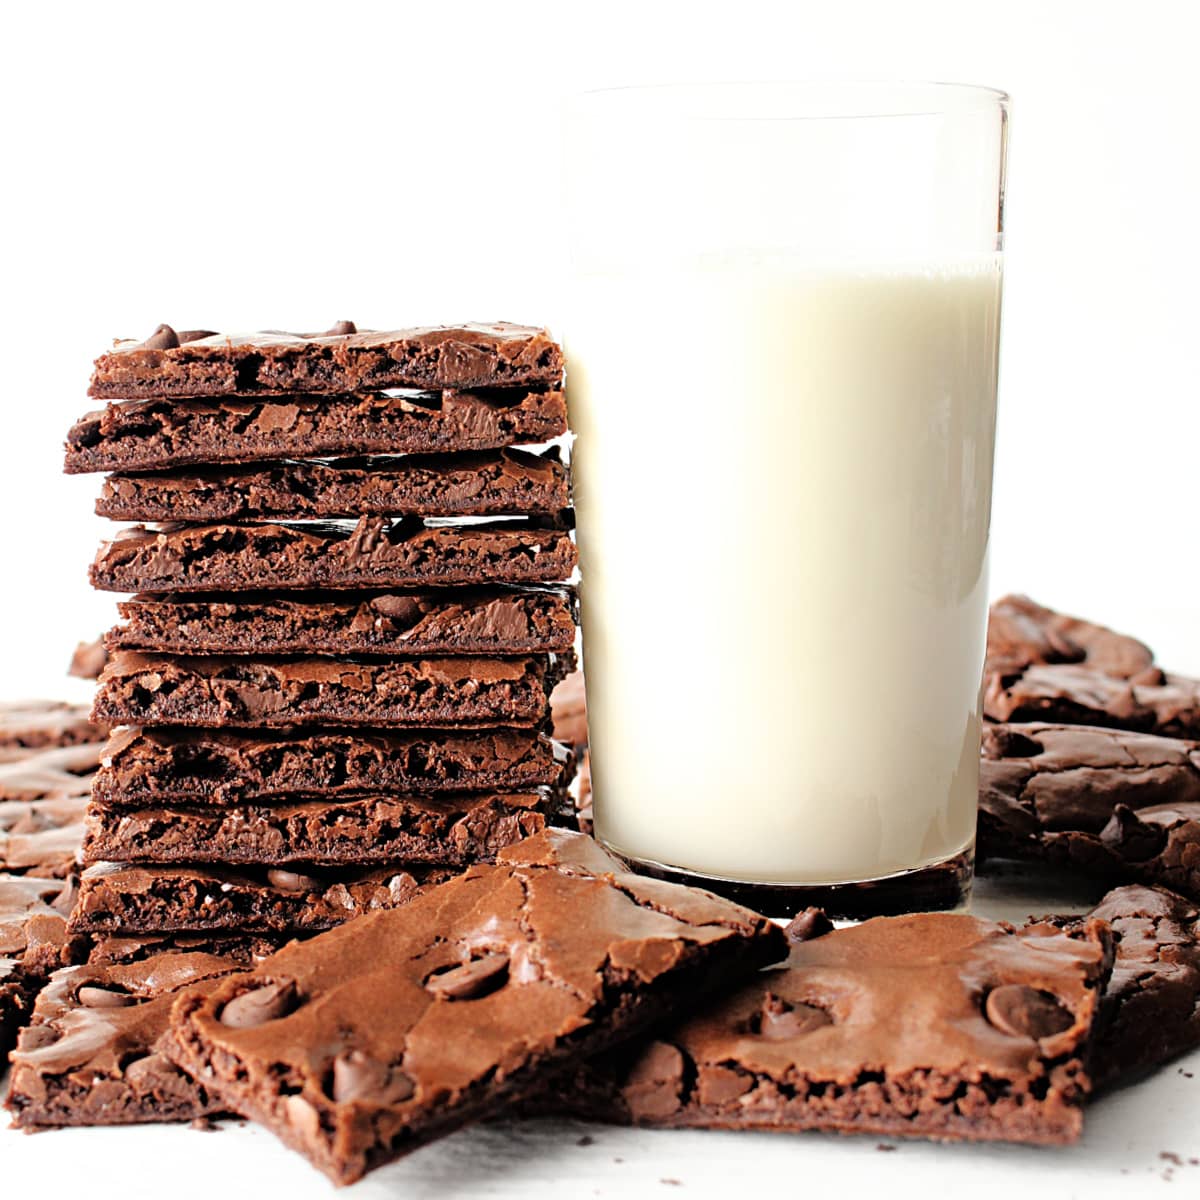 Stack of thin brownie brittle next to a glass of milk.